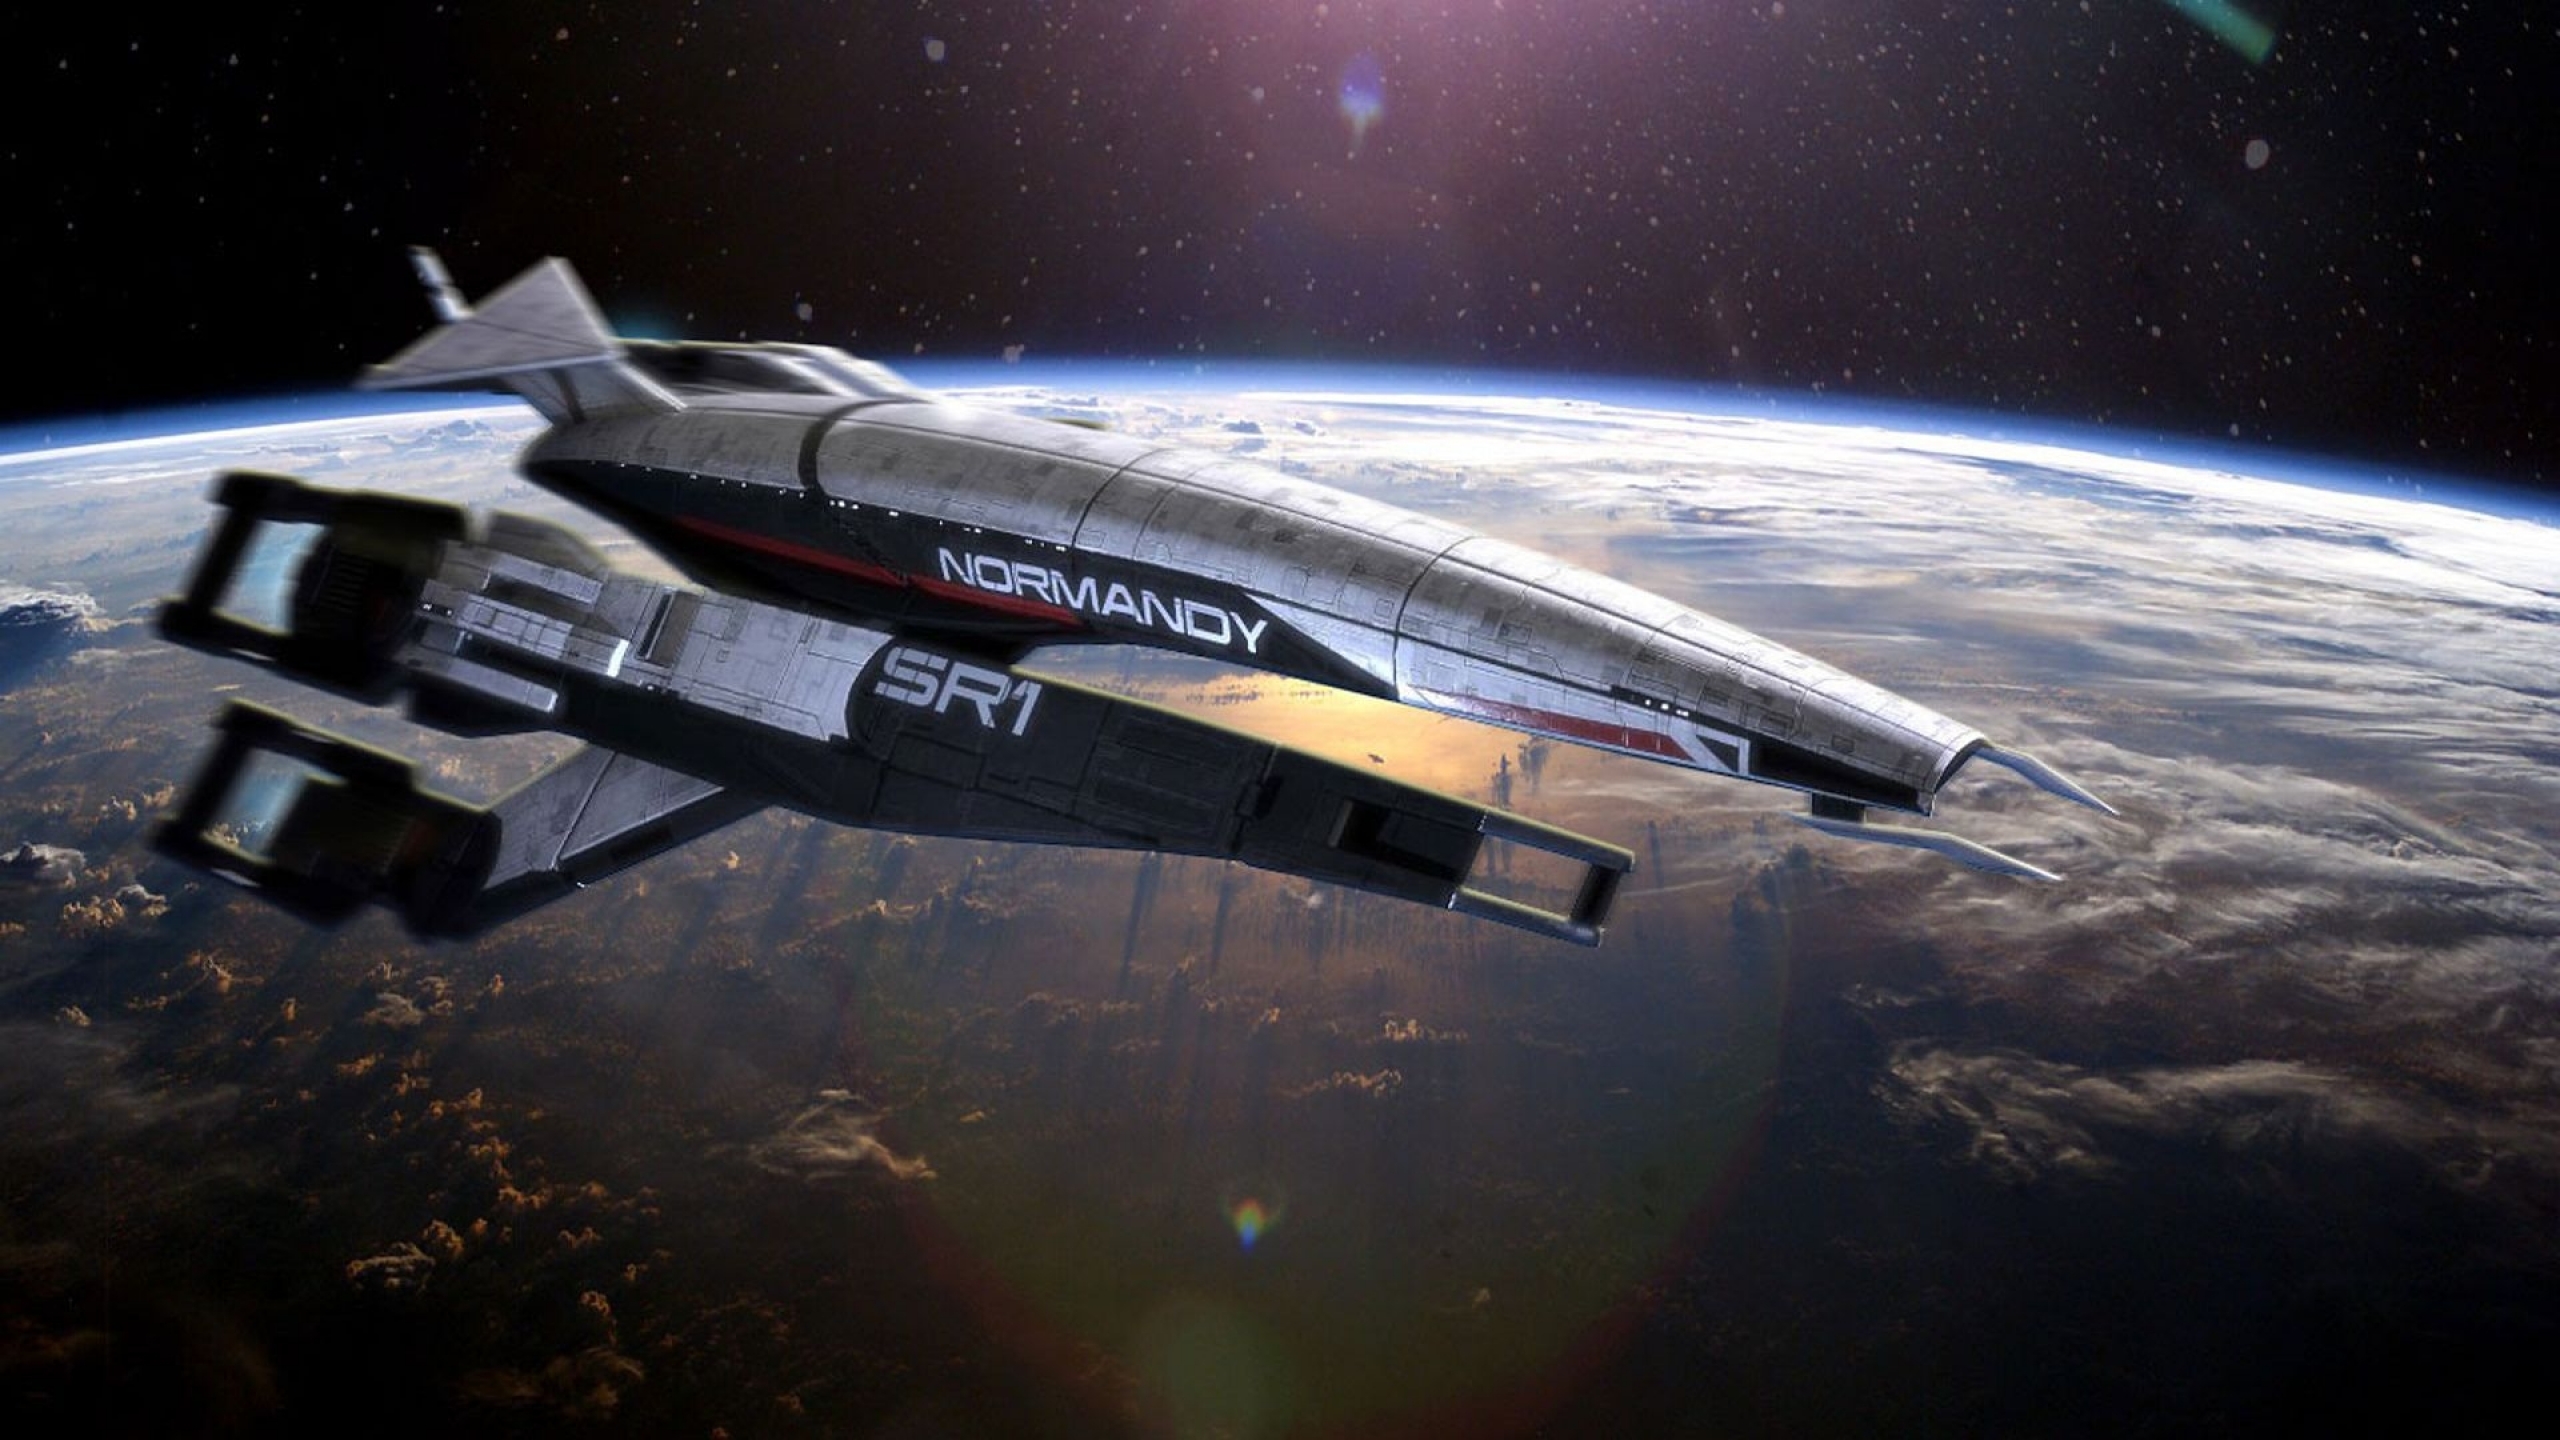 Outer Space Normandy Mass Effect Spaceships